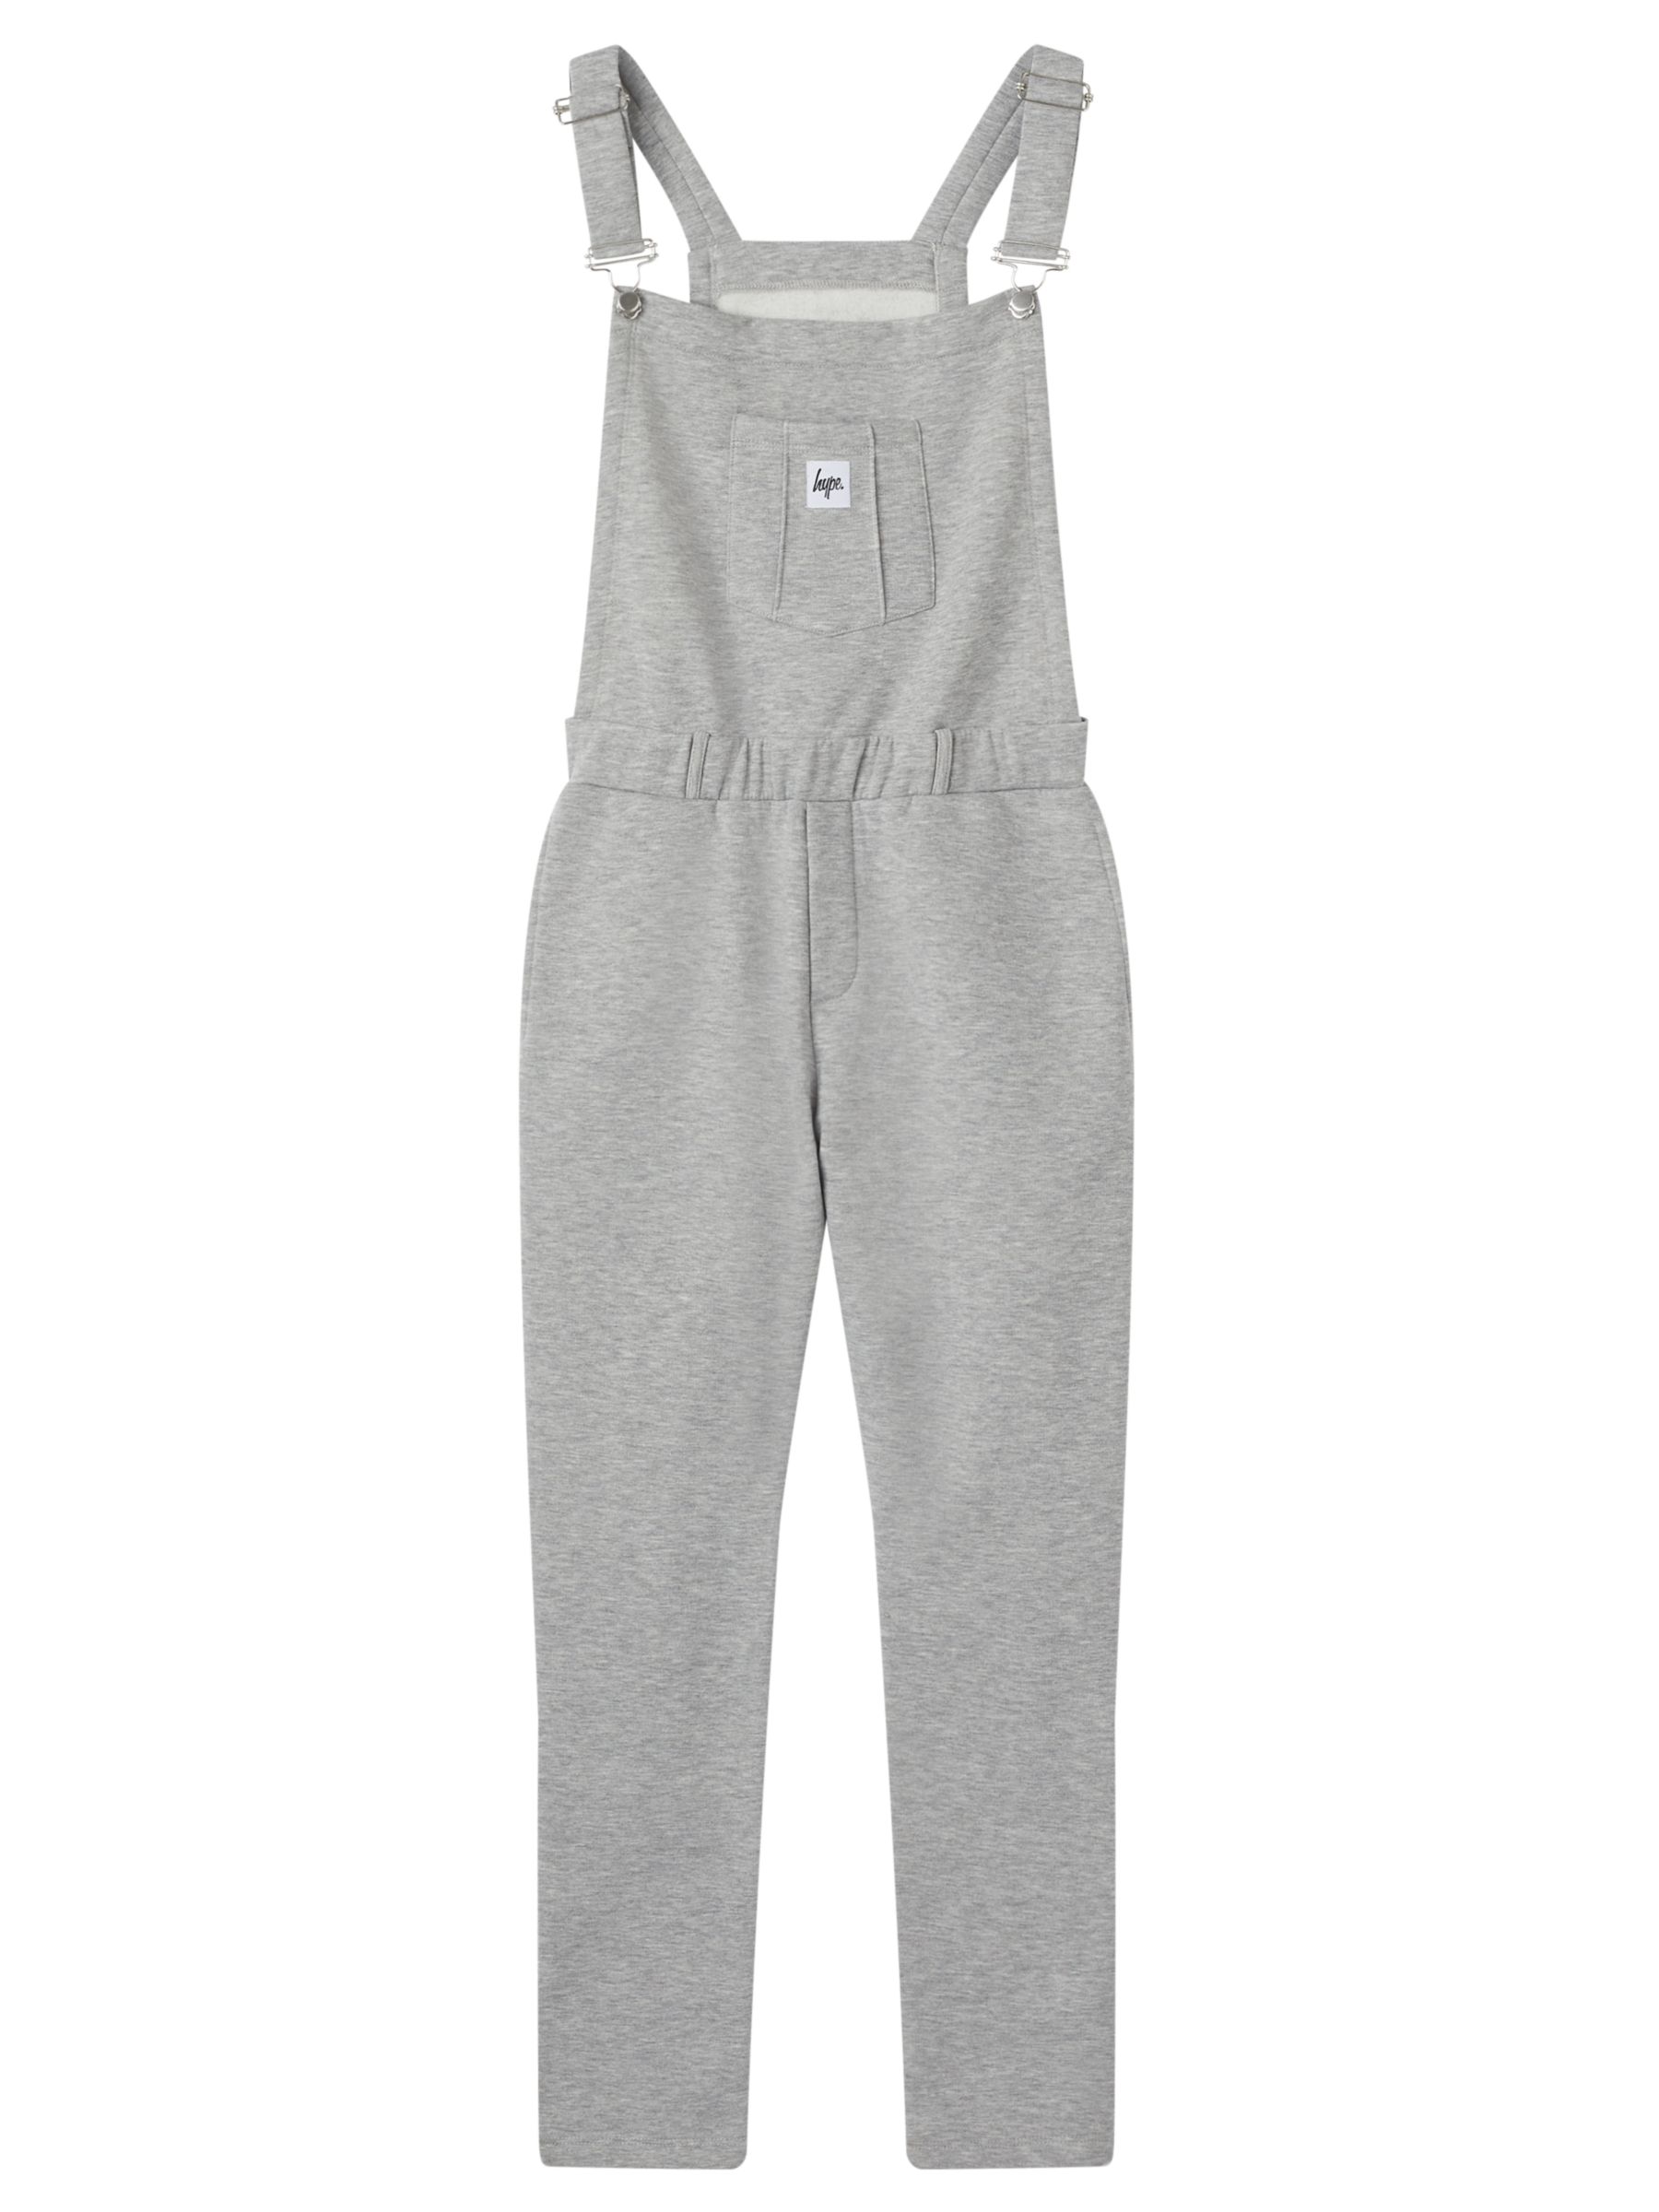 Hype Girls' Jersey Dungarees, Grey, 7-8 years